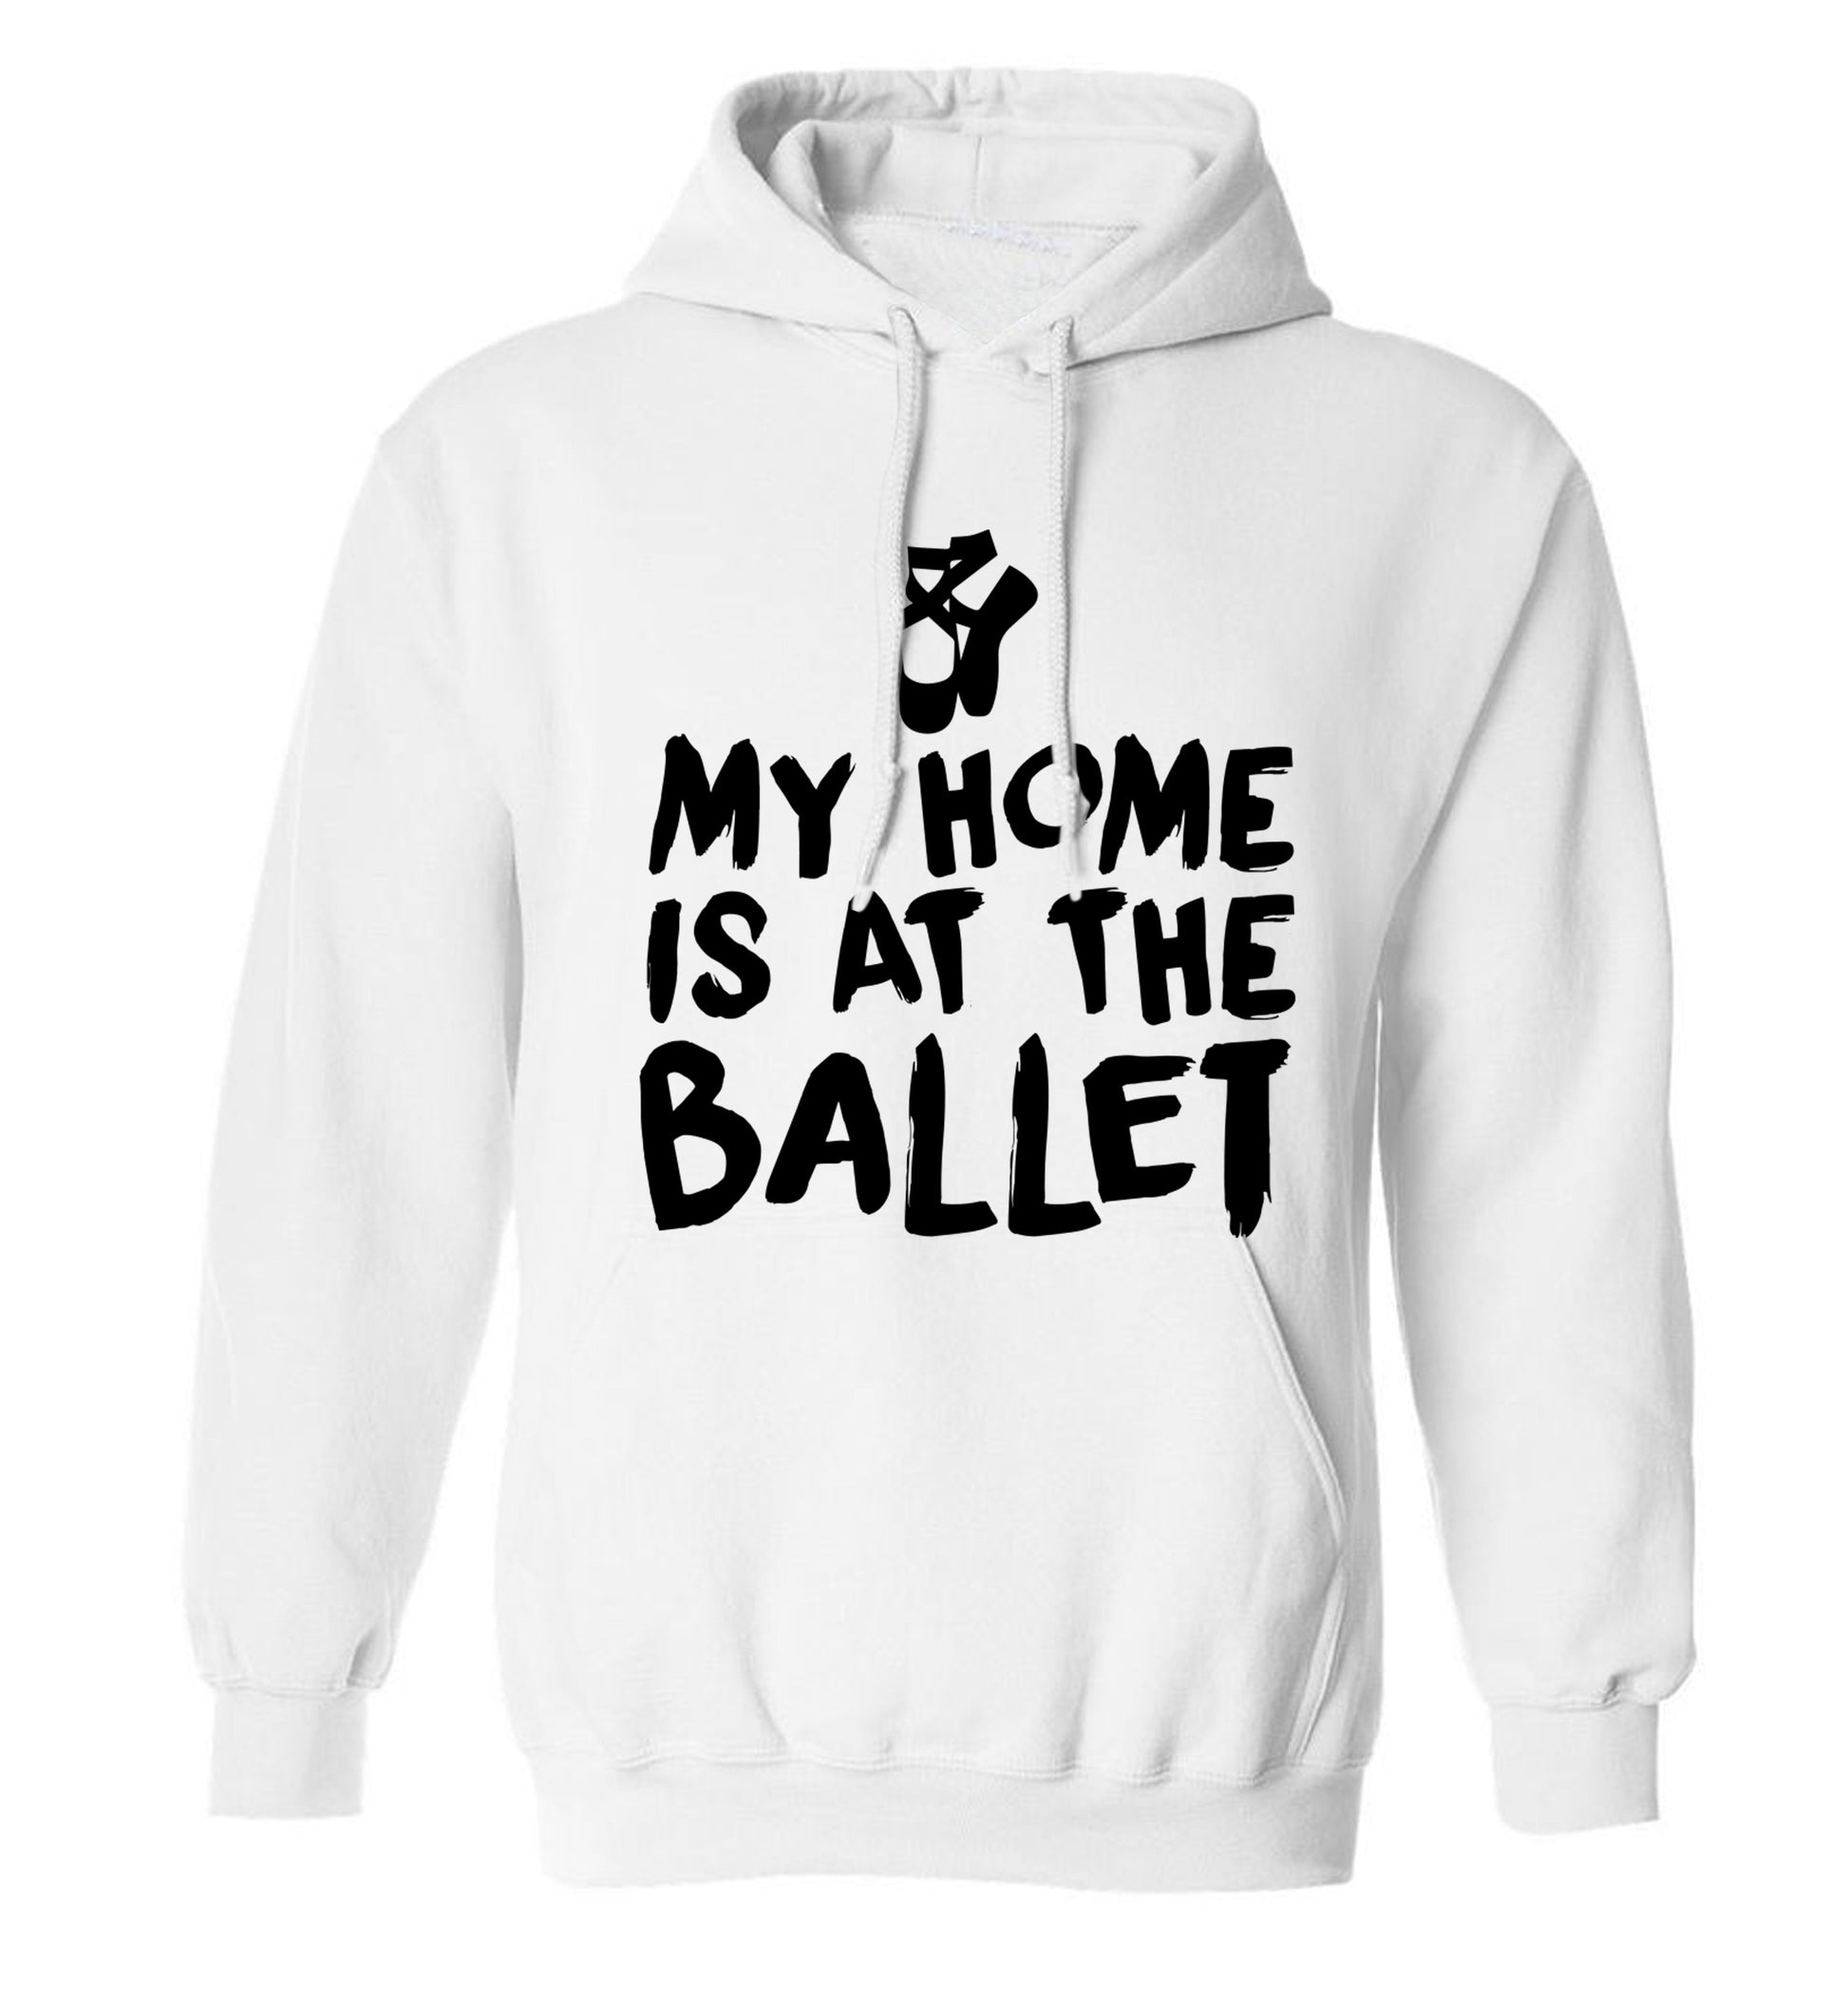 My home is at the ballet adults unisex white hoodie 2XL